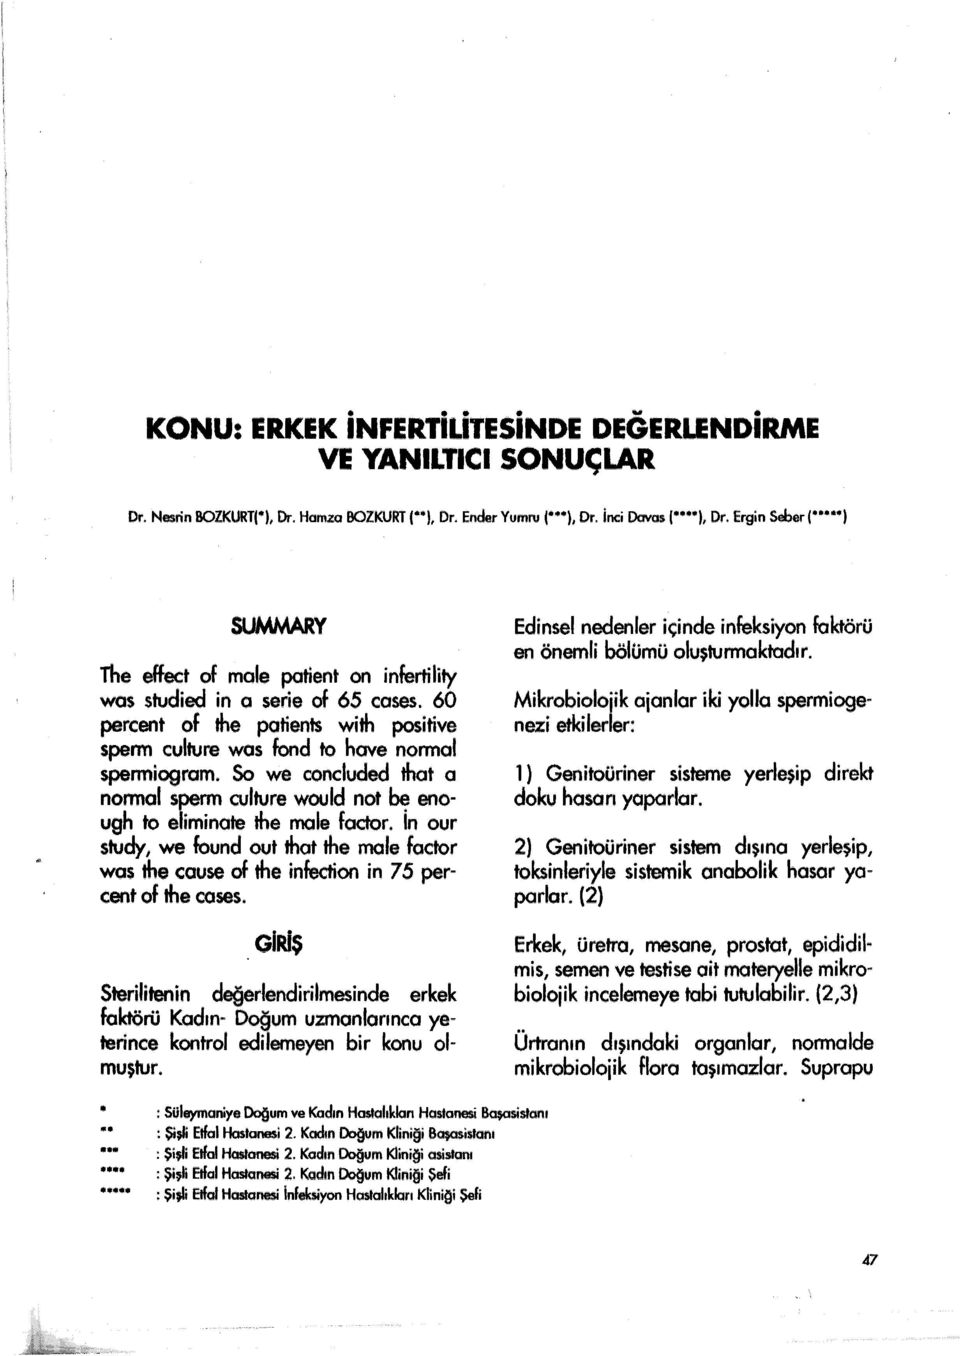 So we concluded that a nonnal spenn culture would not be enough to eliminate the male factor. İn our study, we found out that the mole factor was the cause of the infection in 75 percent of the cases.